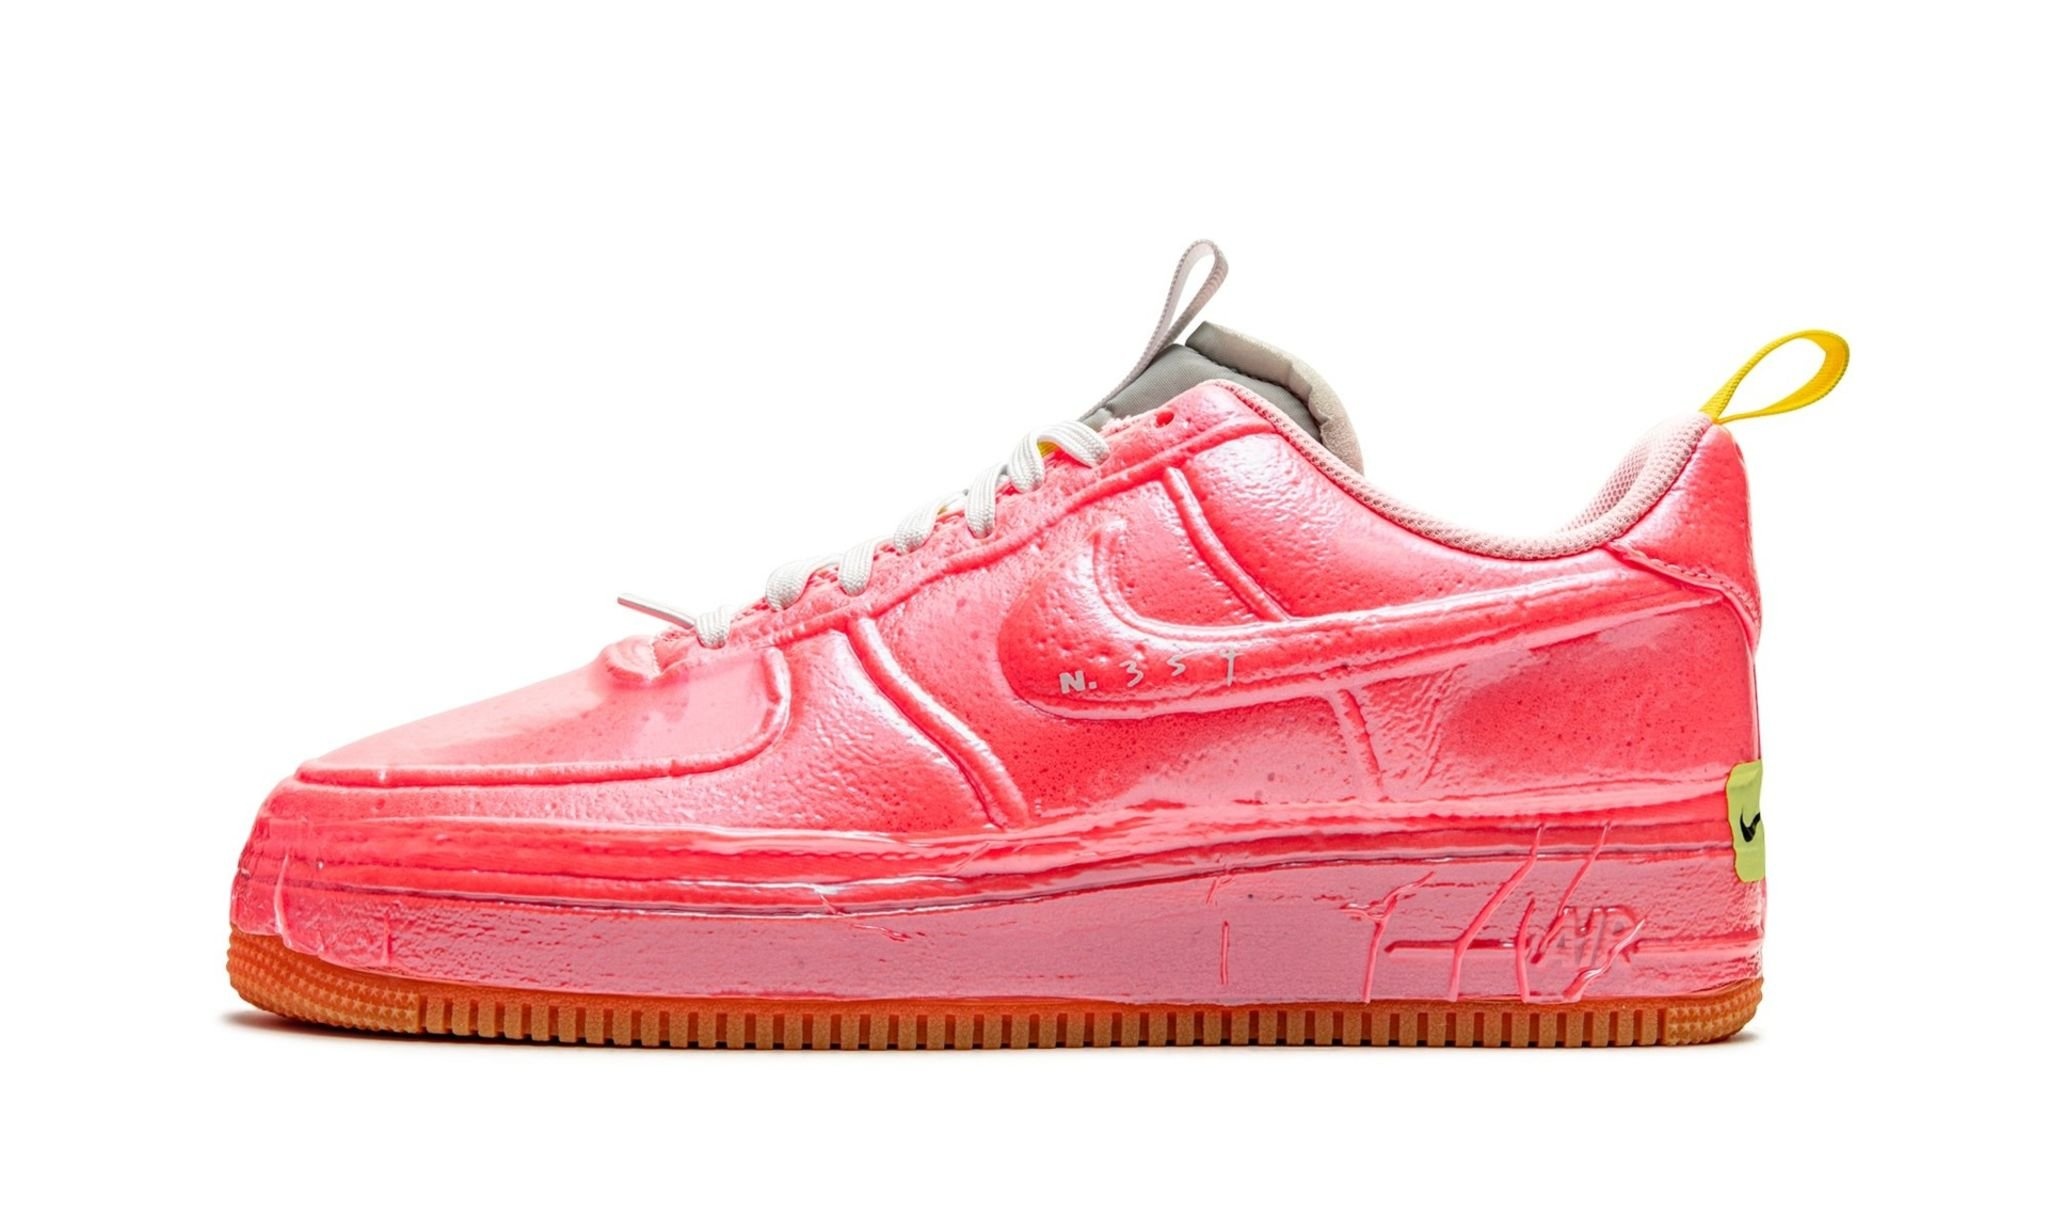 Air Force 1 Low "Experimental Racer Pink" - 1